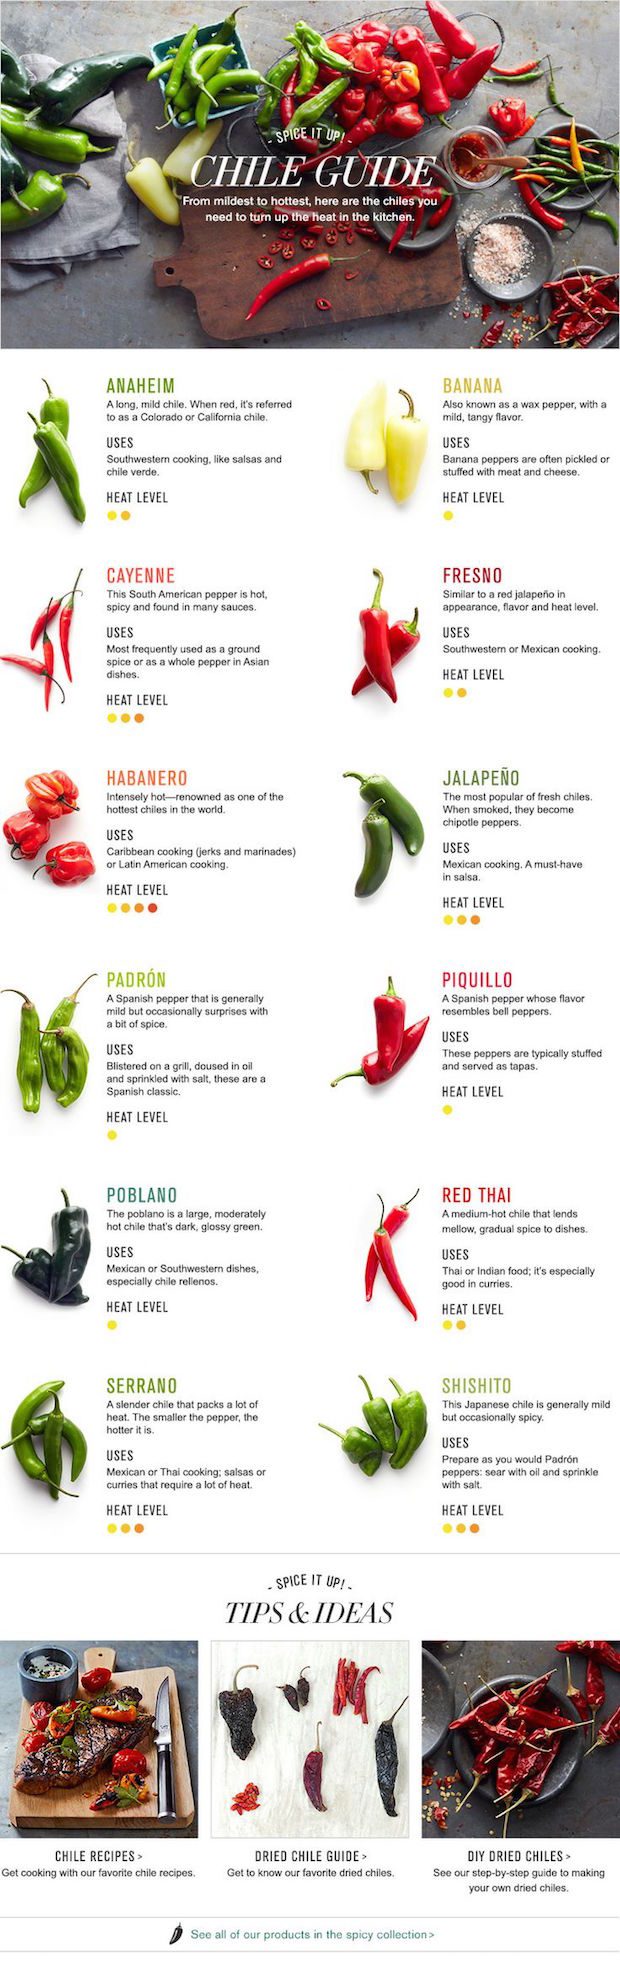 A Guide To Using Chile When You Cook